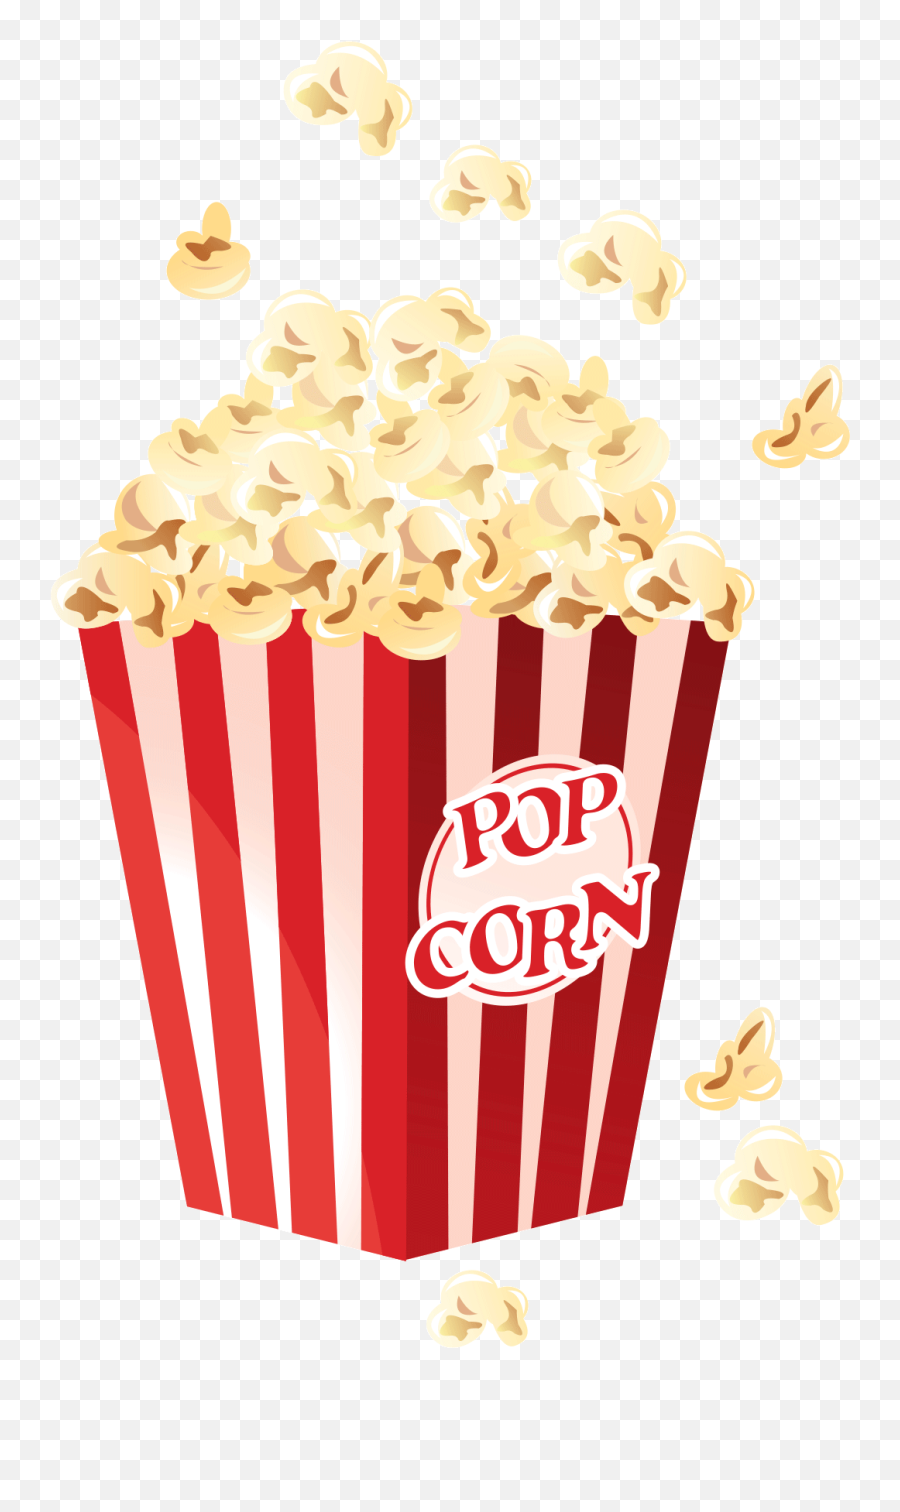 Popcorn Clipart Png Image Free Download - Png Format Popcorn Clipart Emoji,Popcorn Clipart